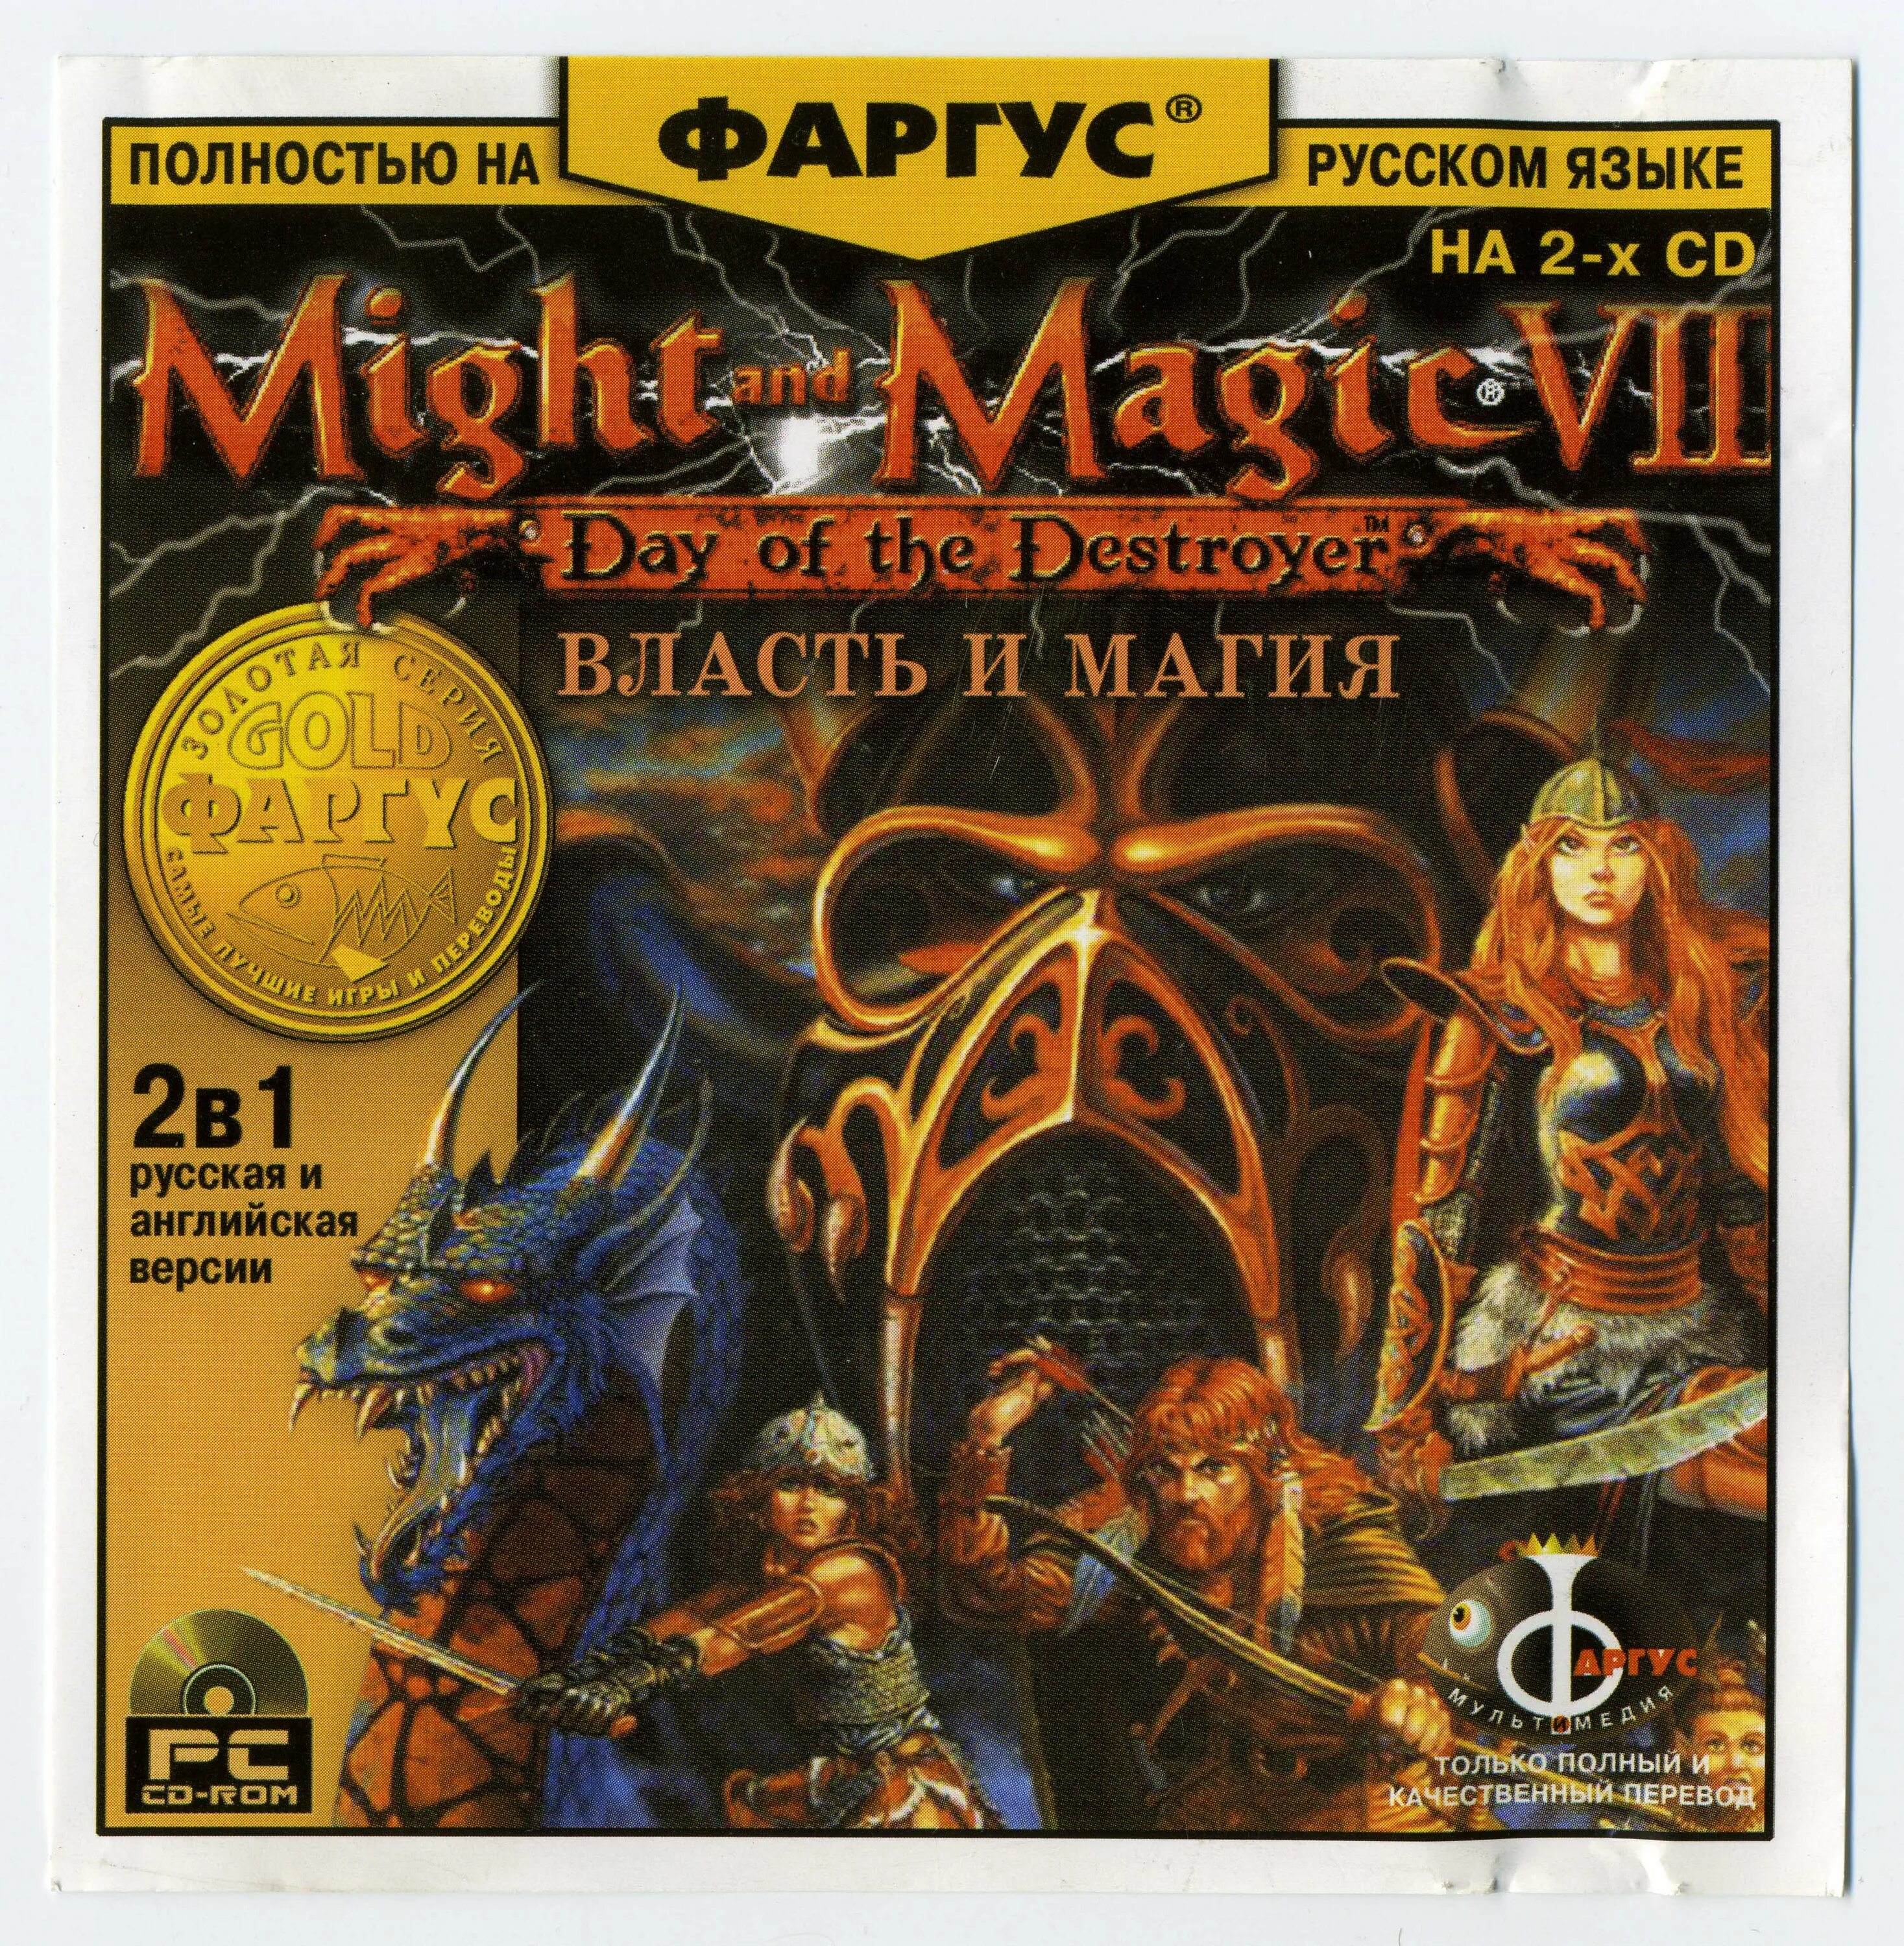 Might and magic day of the destroyer. Might and Magic VIII. Might and Magic VIII Day of the Destroyer. Фаргус. Фаргус обложки.